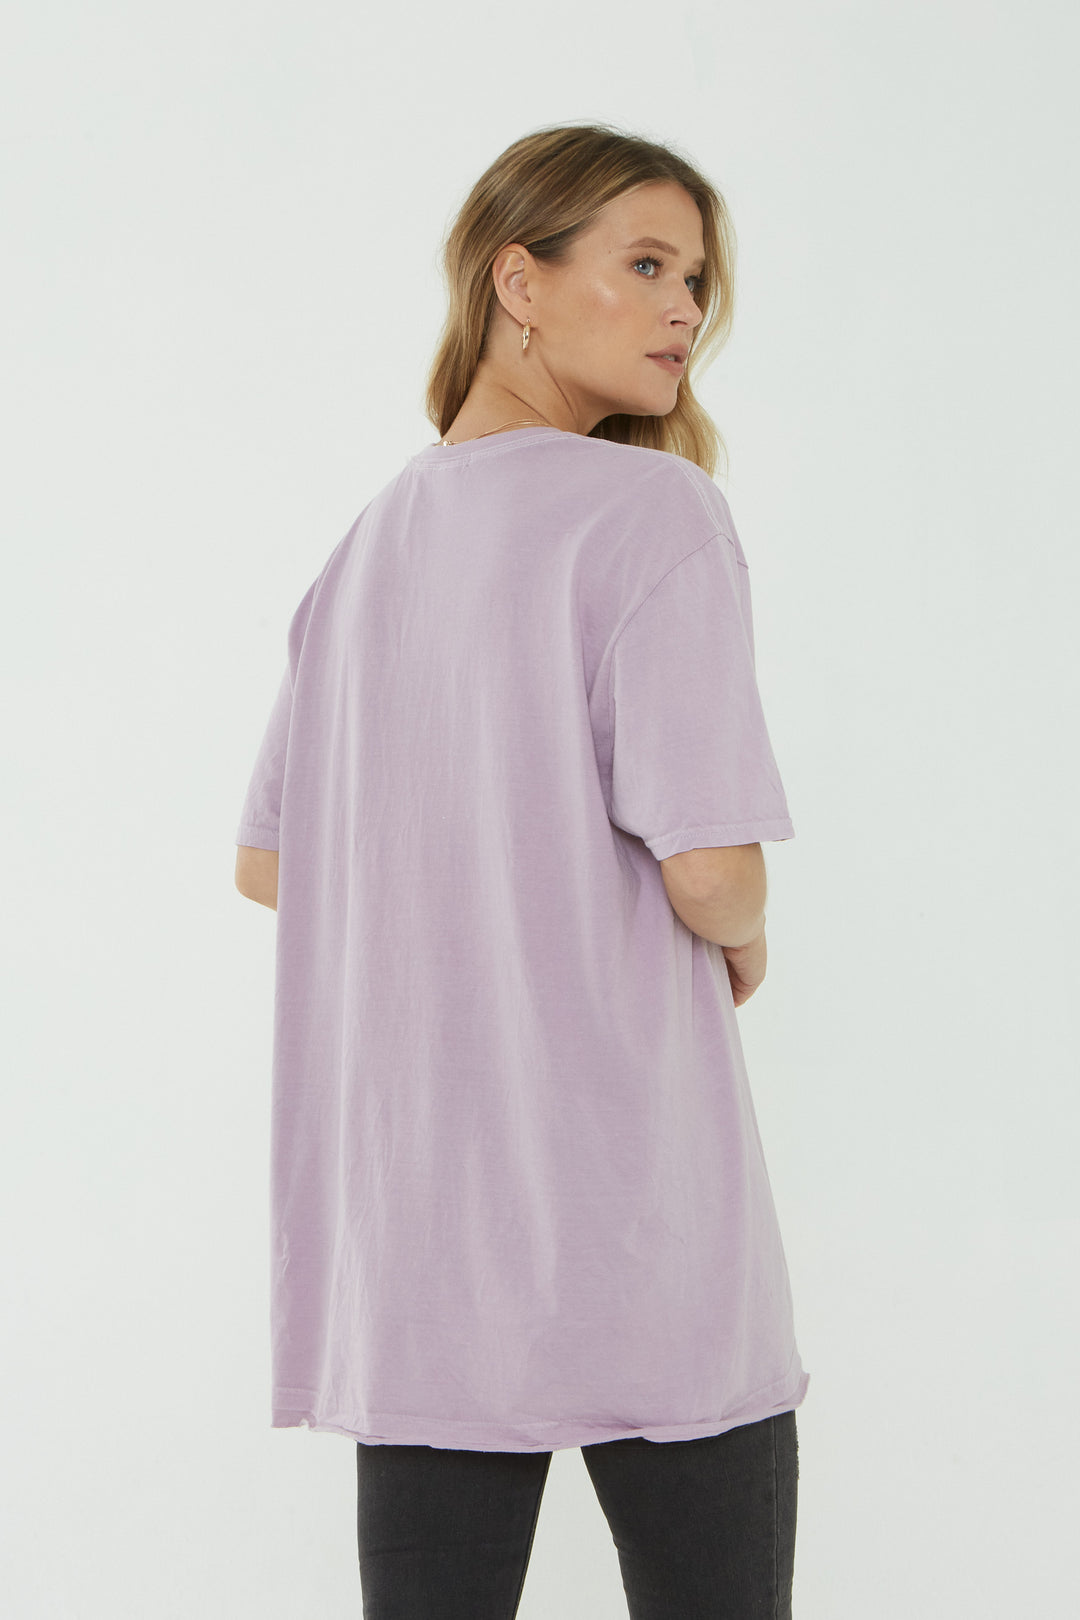 ASHER OVERSIZED TEE - Kingfisher Road - Online Boutique